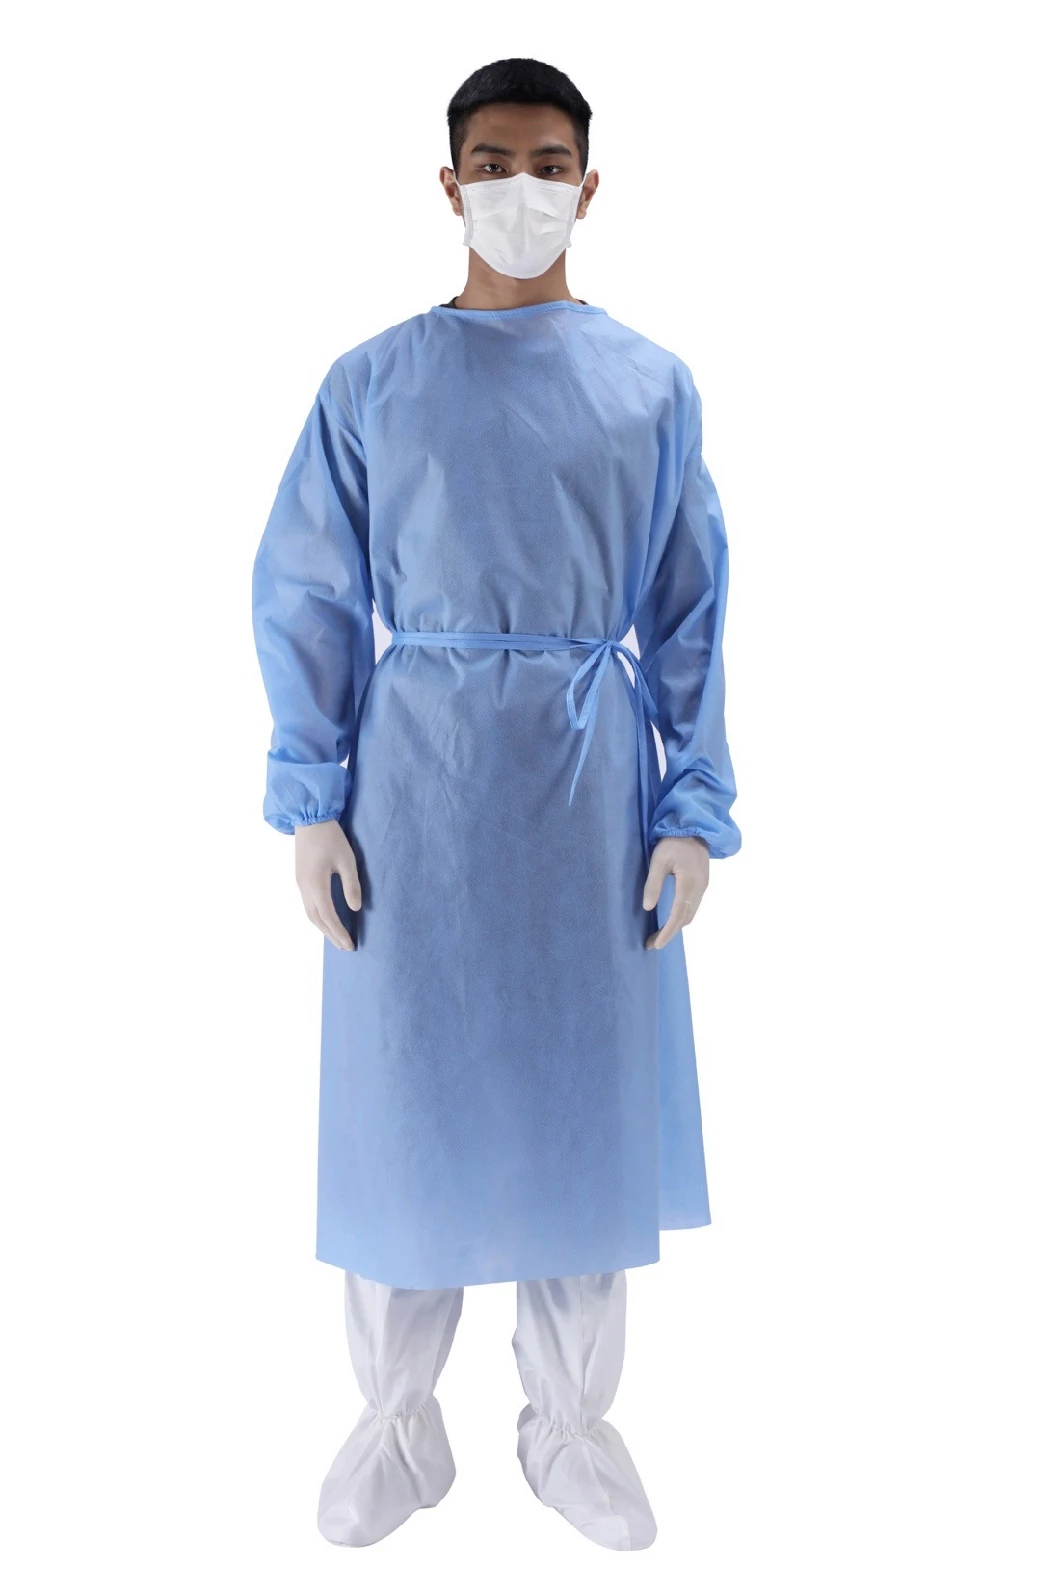 SMS Nonwoven Fabric for Isolation Gown/Nonwoven Fabric/Anti-Bacterial Fabric Surgical Gown